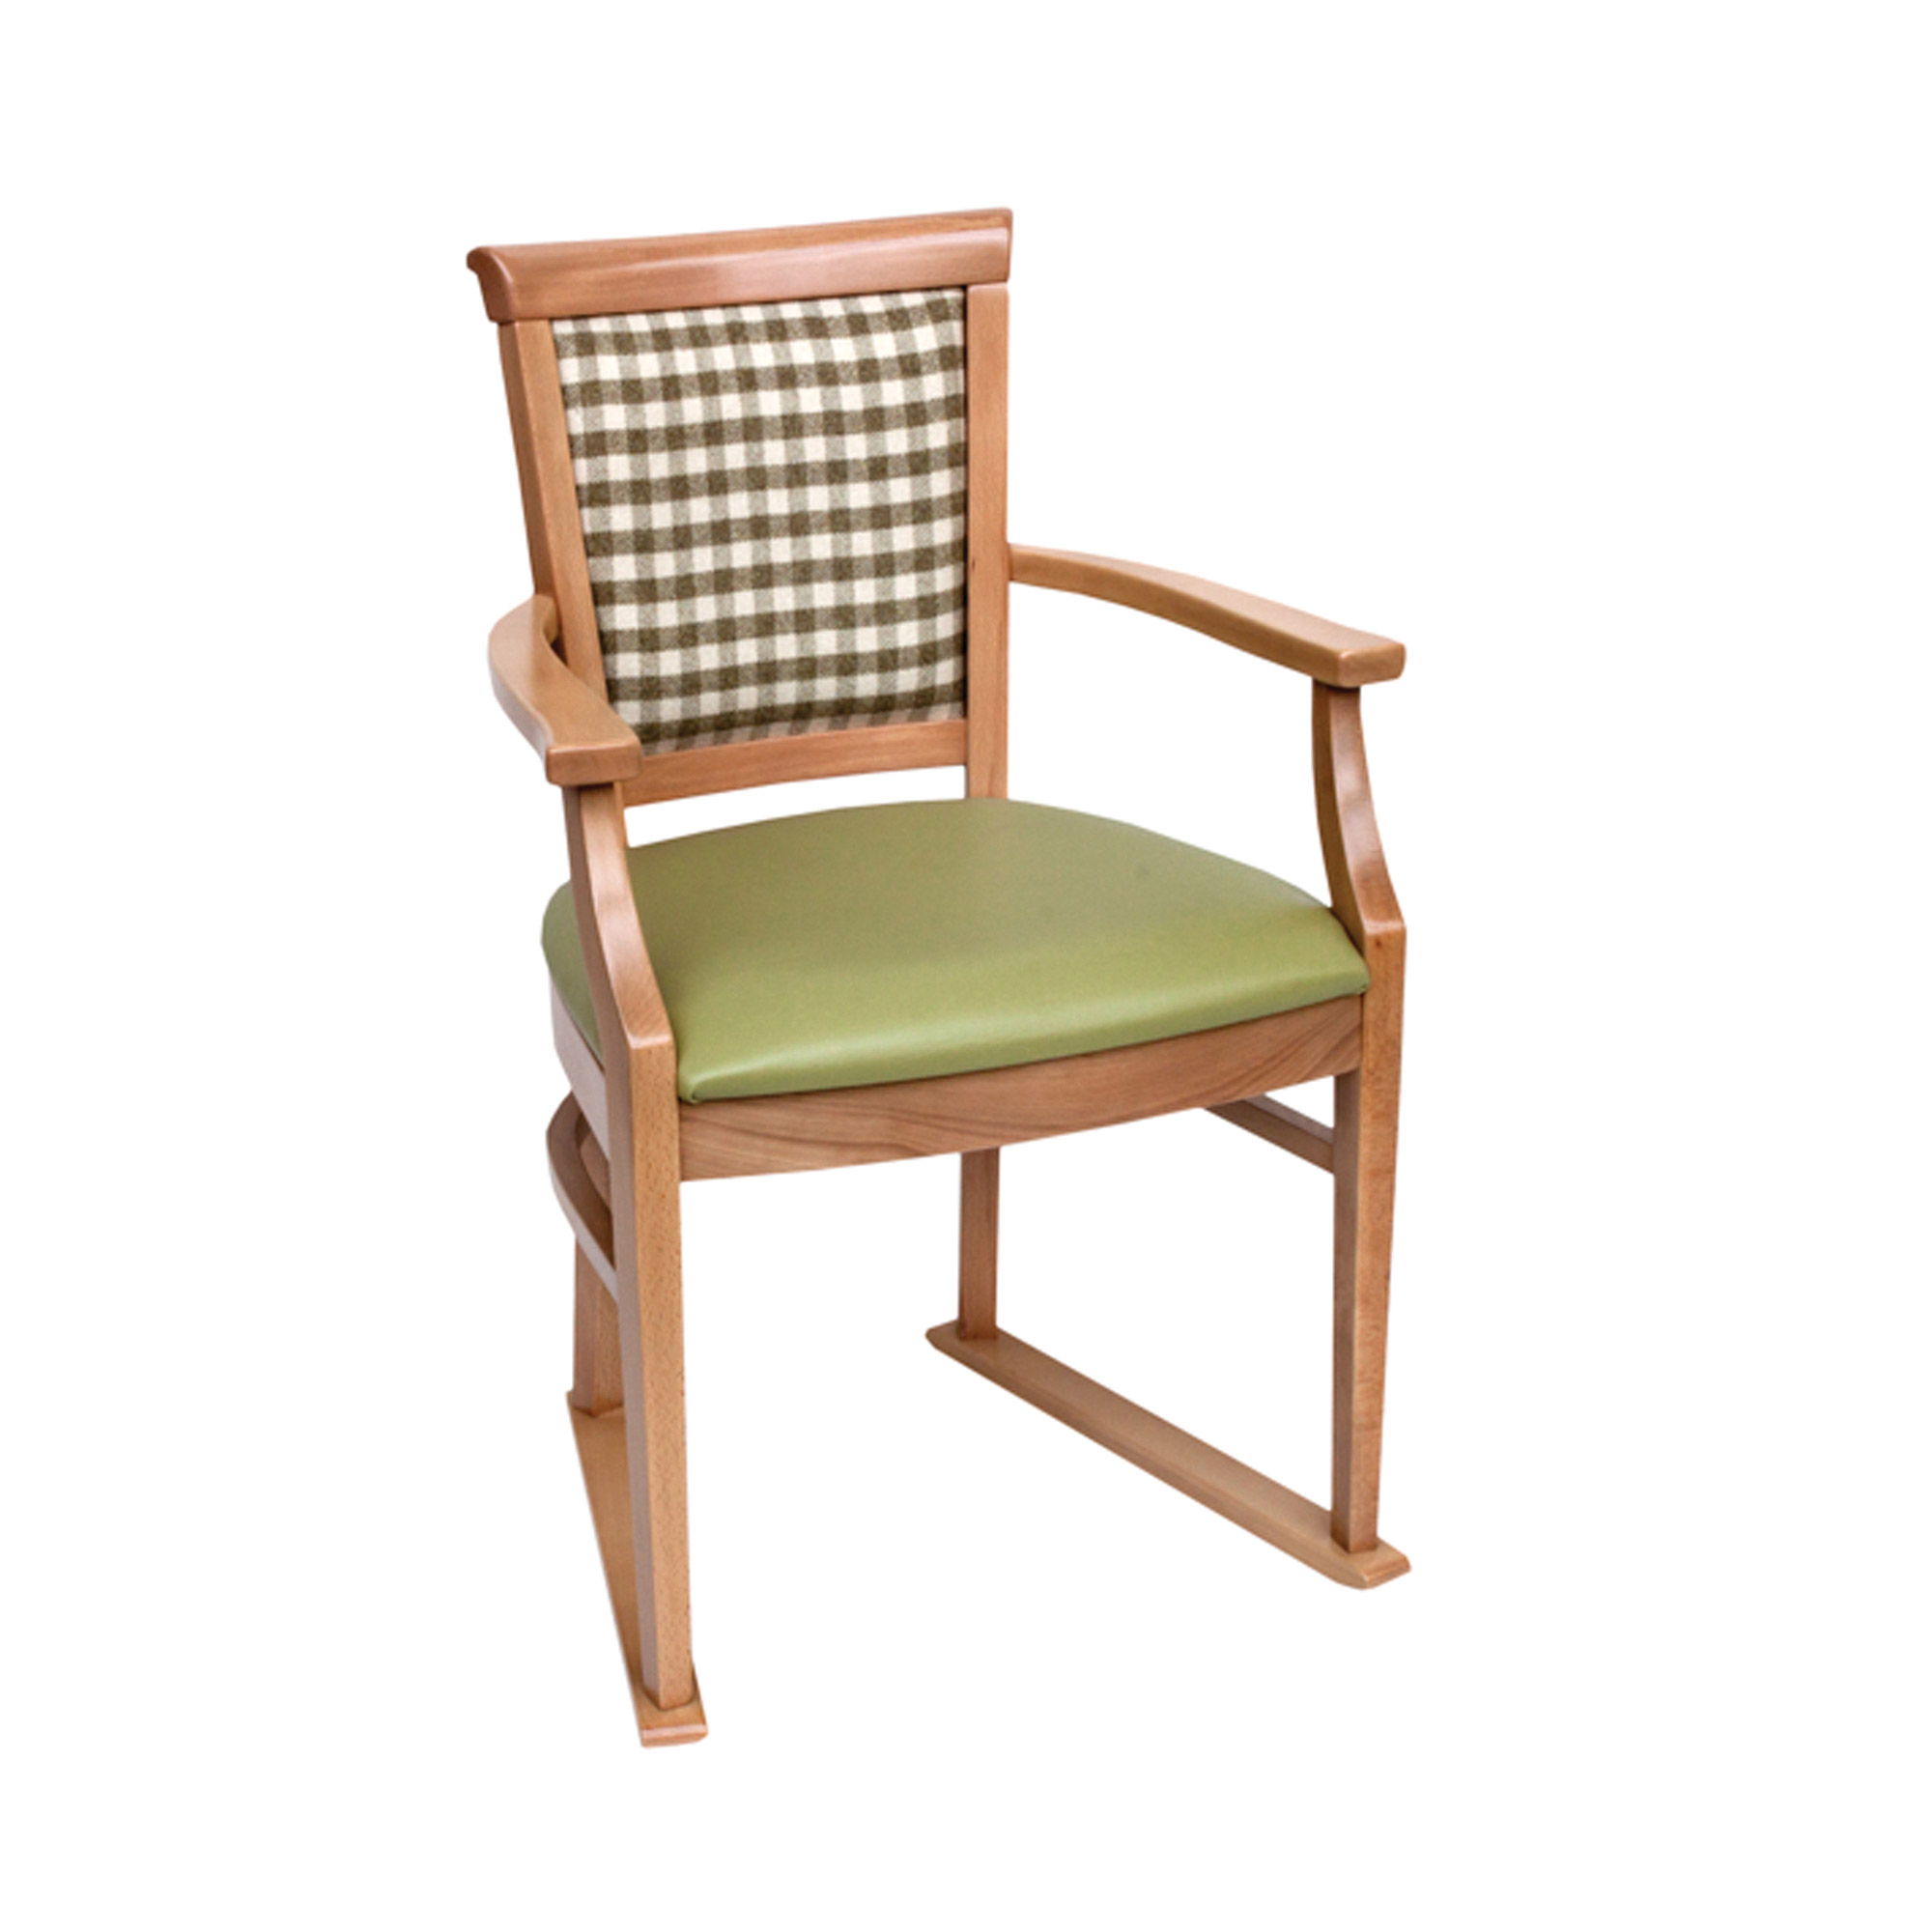 Irwin Chair with Arms and Skis C Range